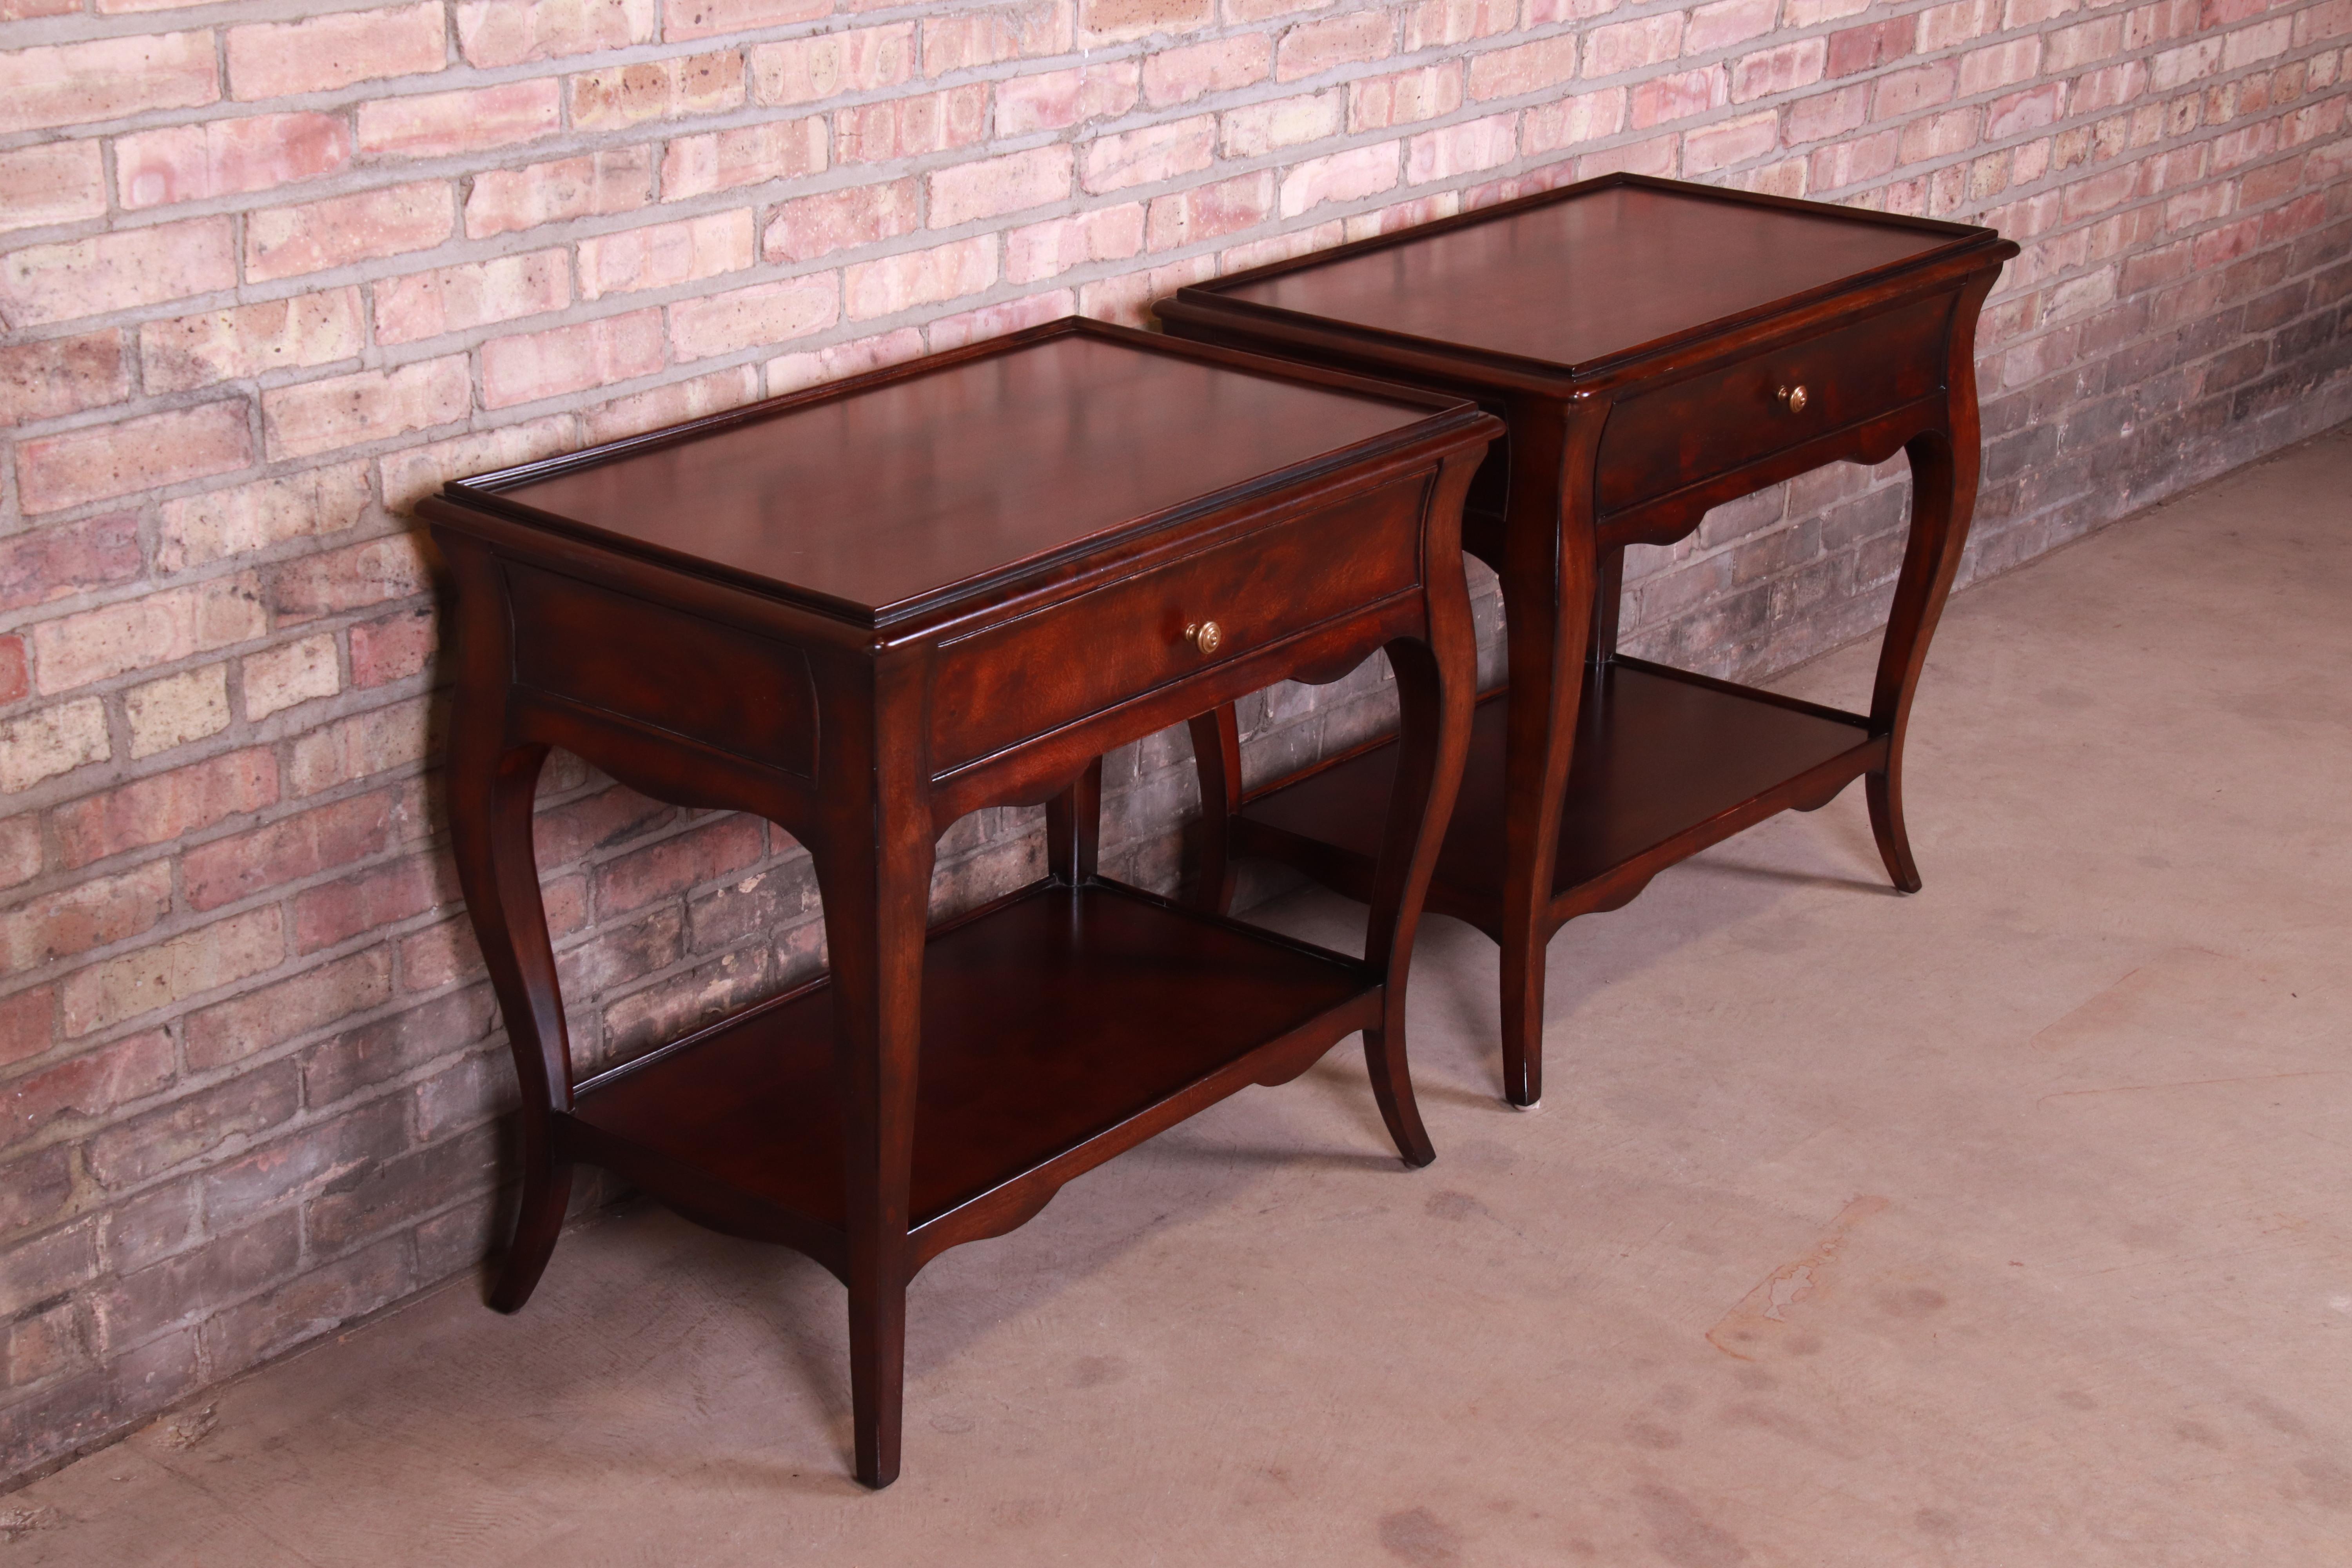 20th Century Bernhardt French Provincial Louis XV Style Mahogany Nightstands, Pair